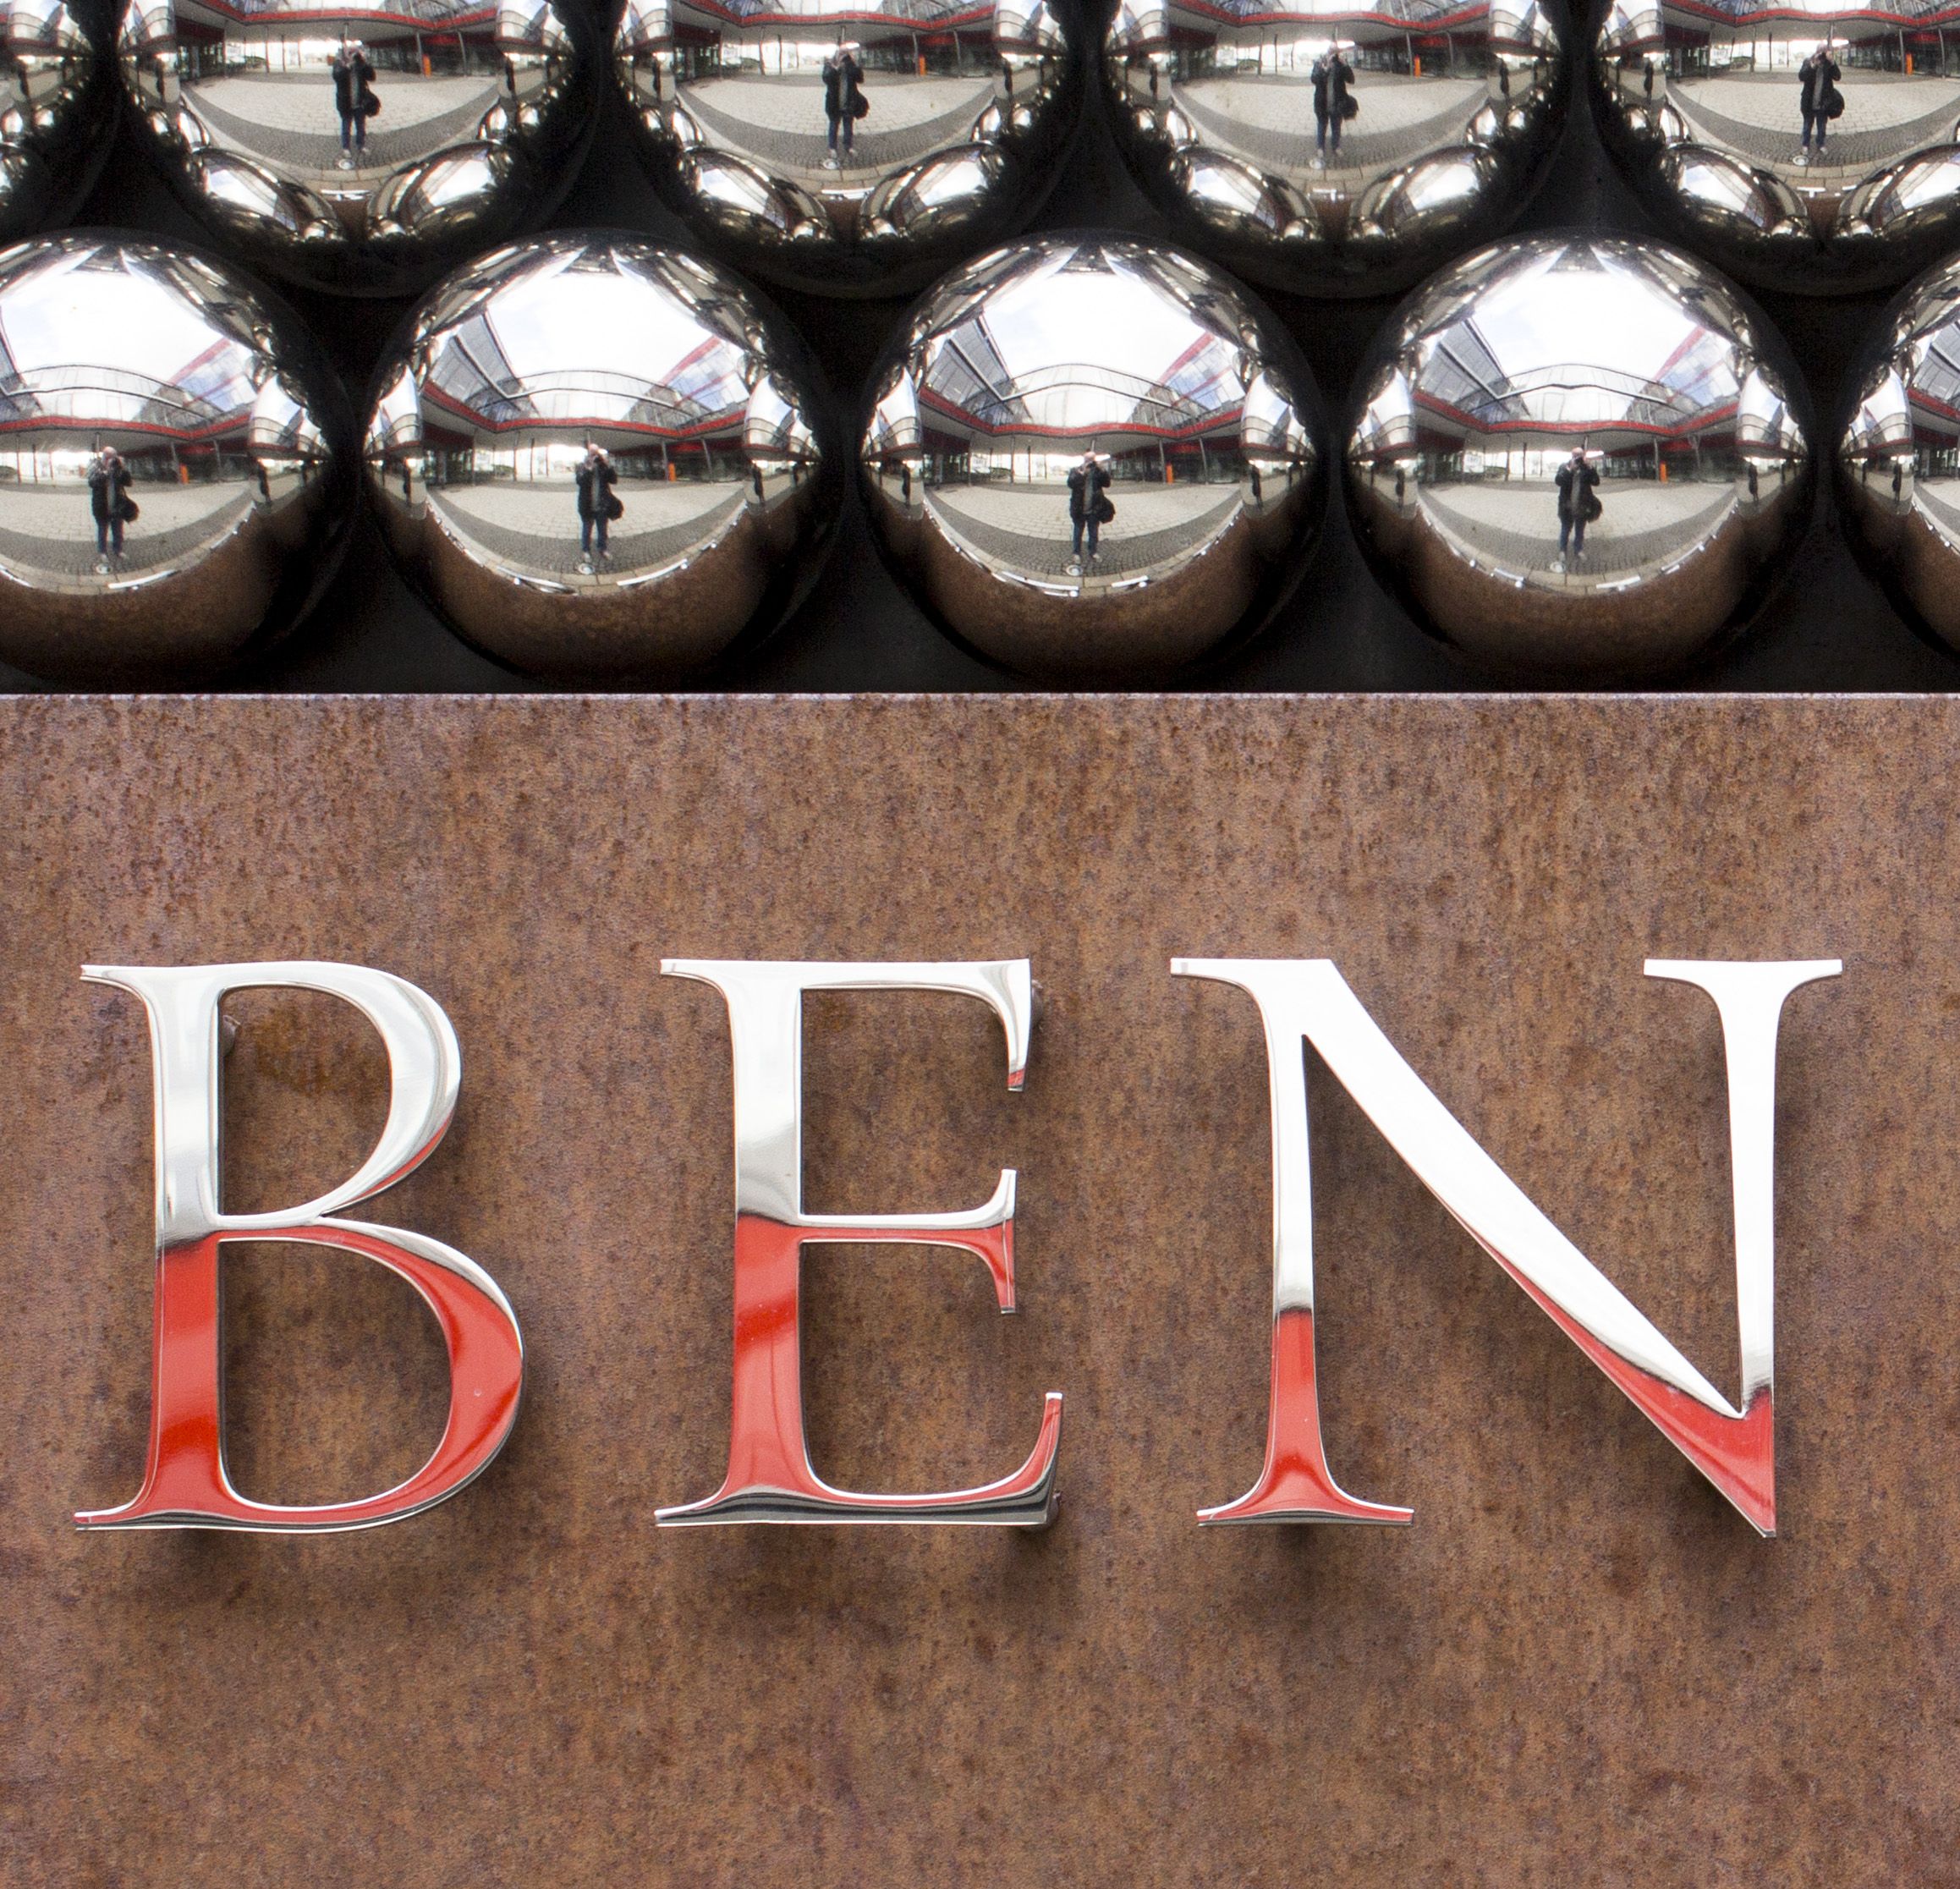 Detailed view of the capital letters B, E, N in stainless steel